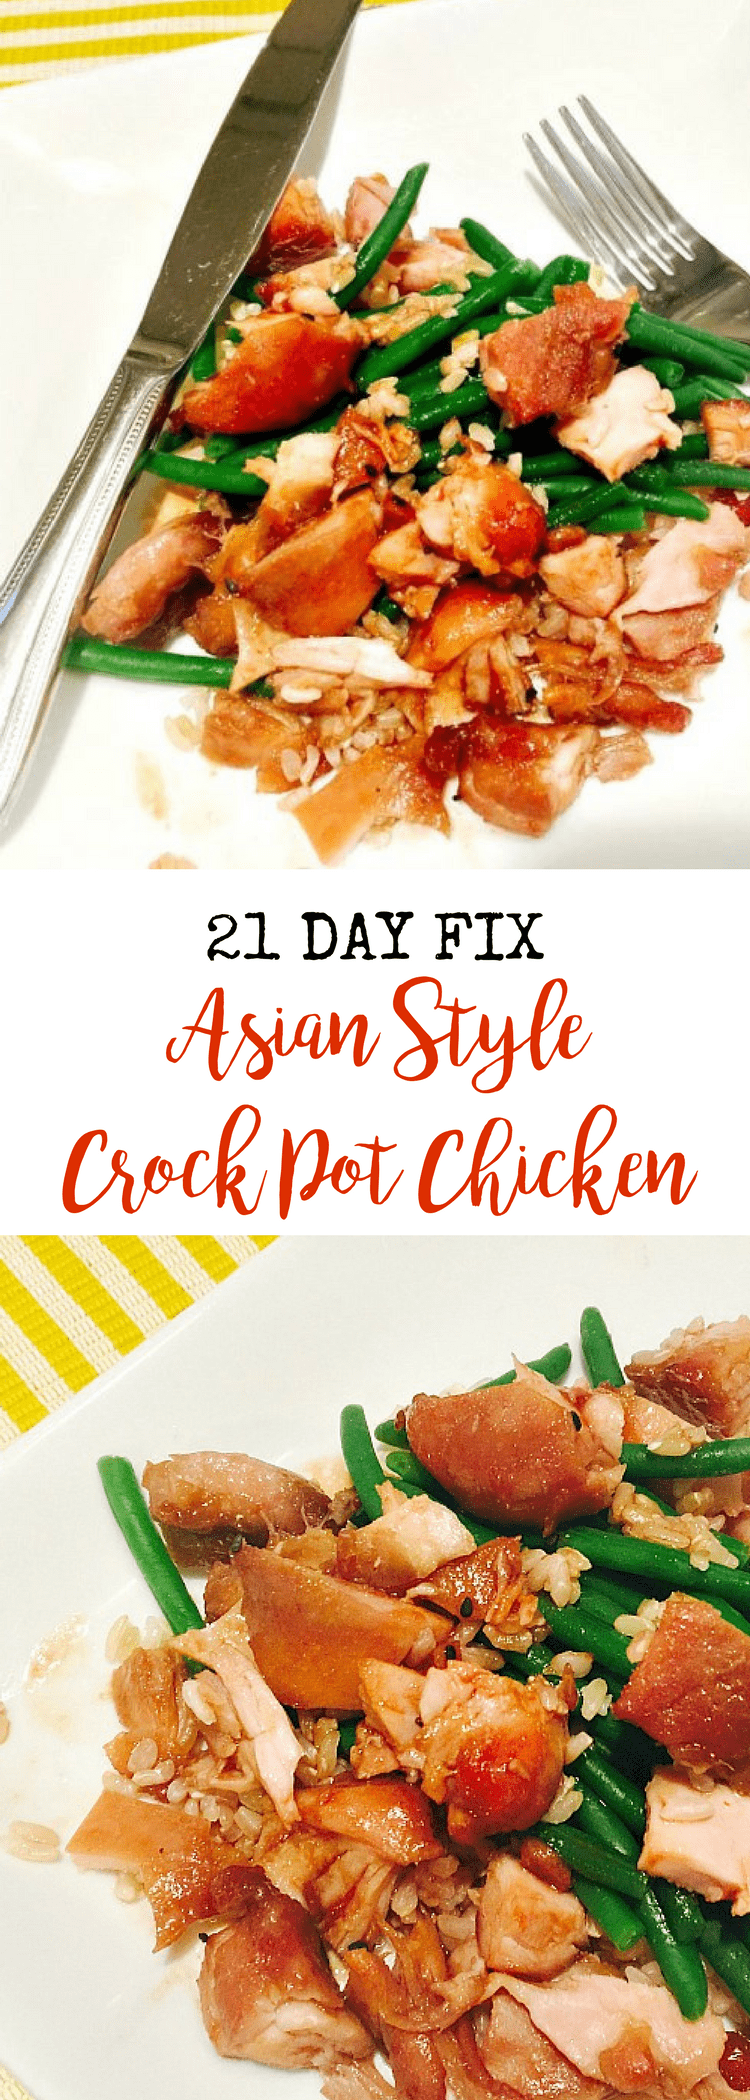 21 Day Fix Asian Style Crock Pot Chicken | Confessions of a Fit Foodie 